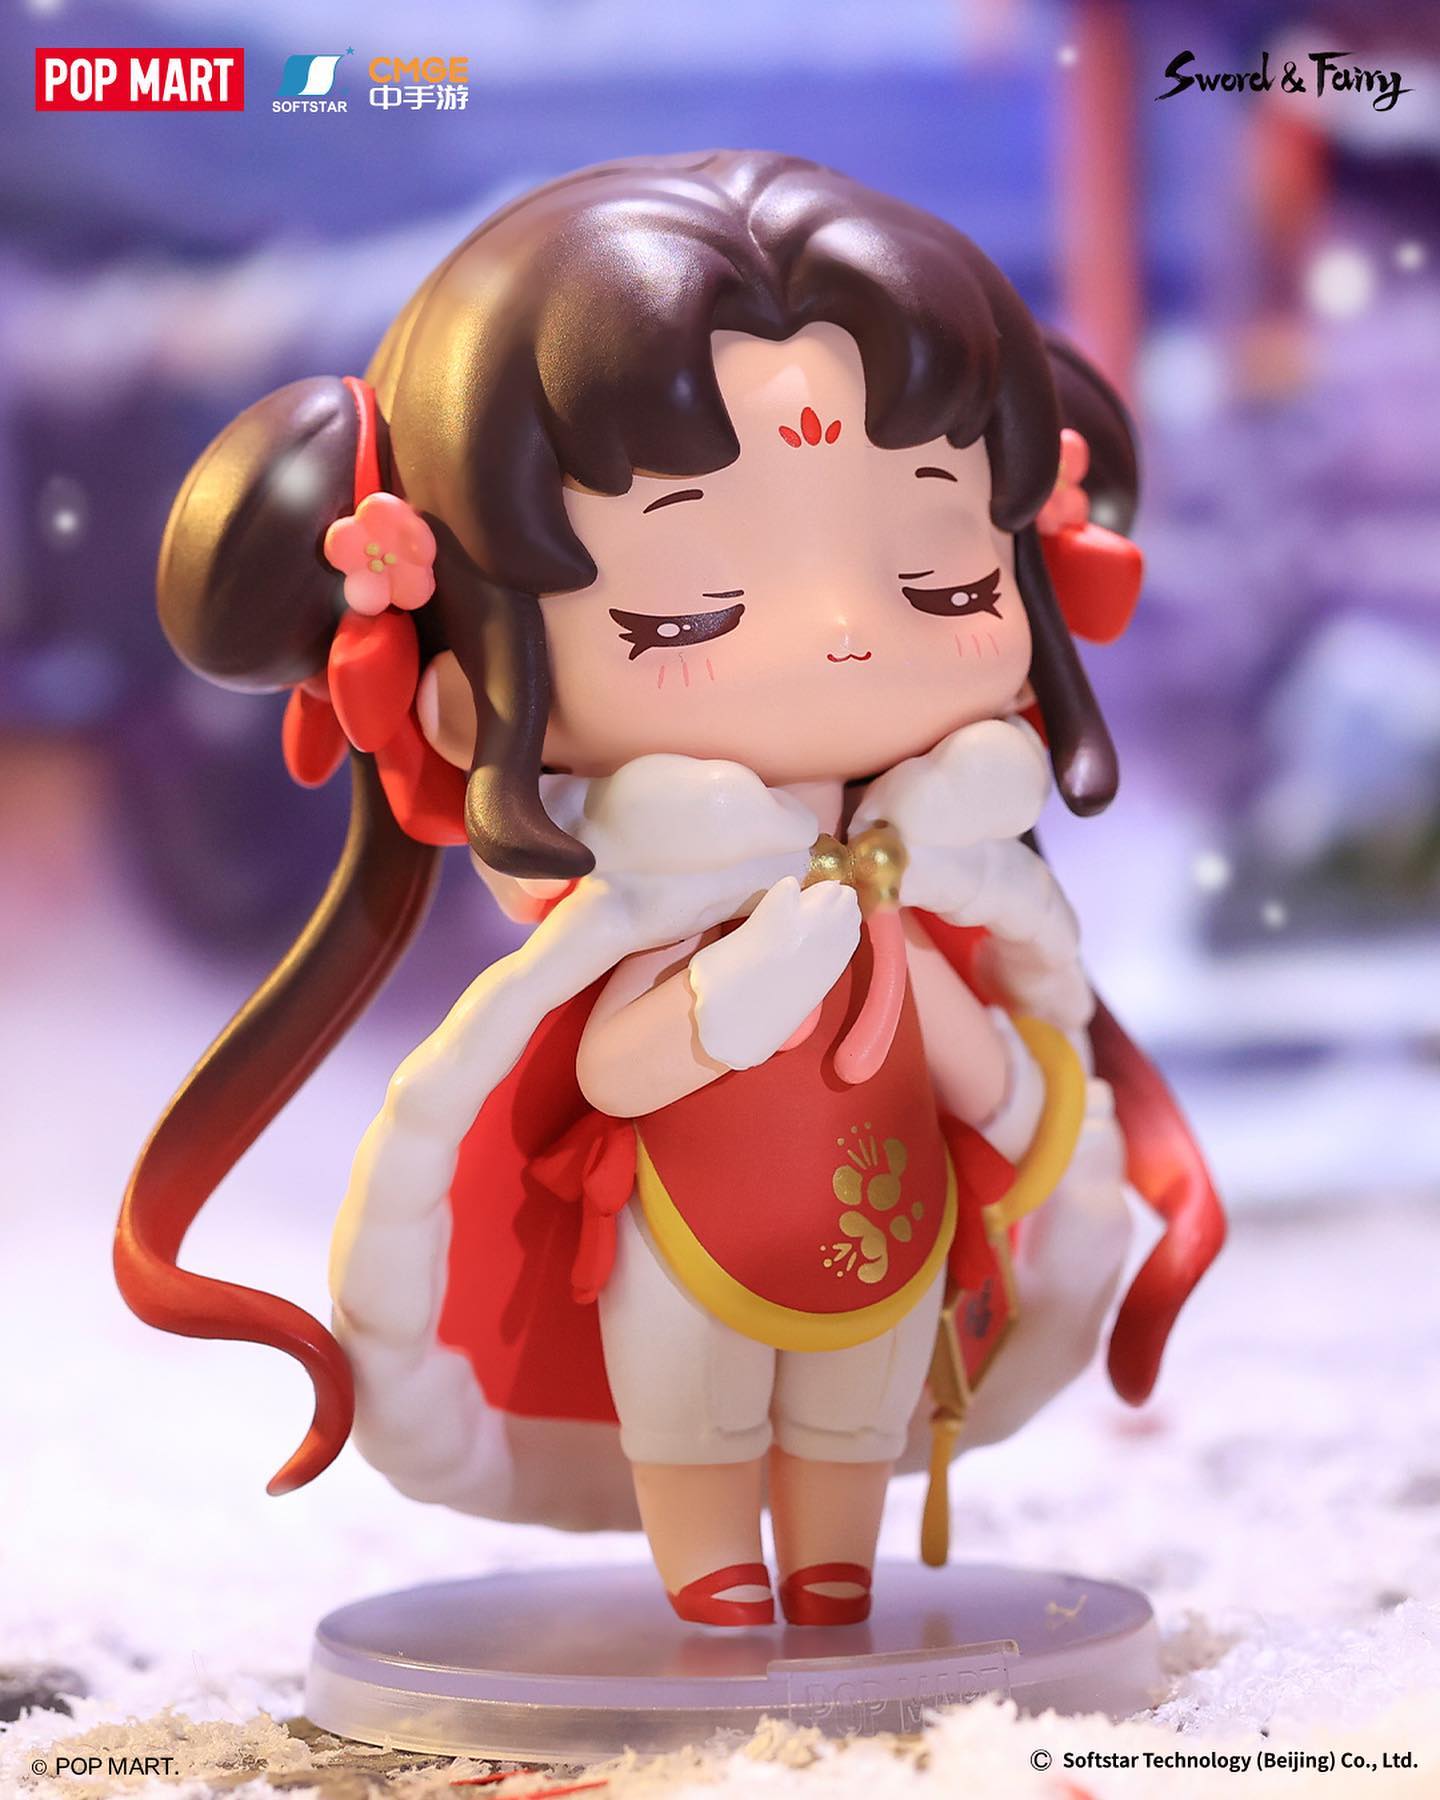 Sword and Fairy: Chinese Traditional Festival Blind Box Series